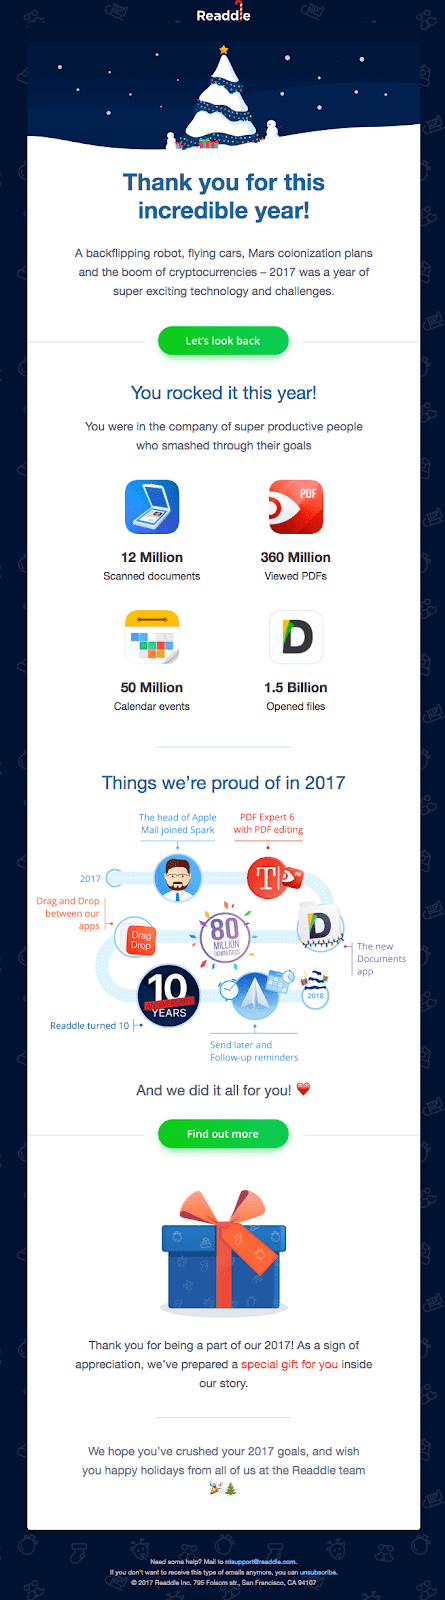 Readdle takes it a step further by sending their leads a yearly retrospective email, thanking them for being a part of the company’s success over the past year. 